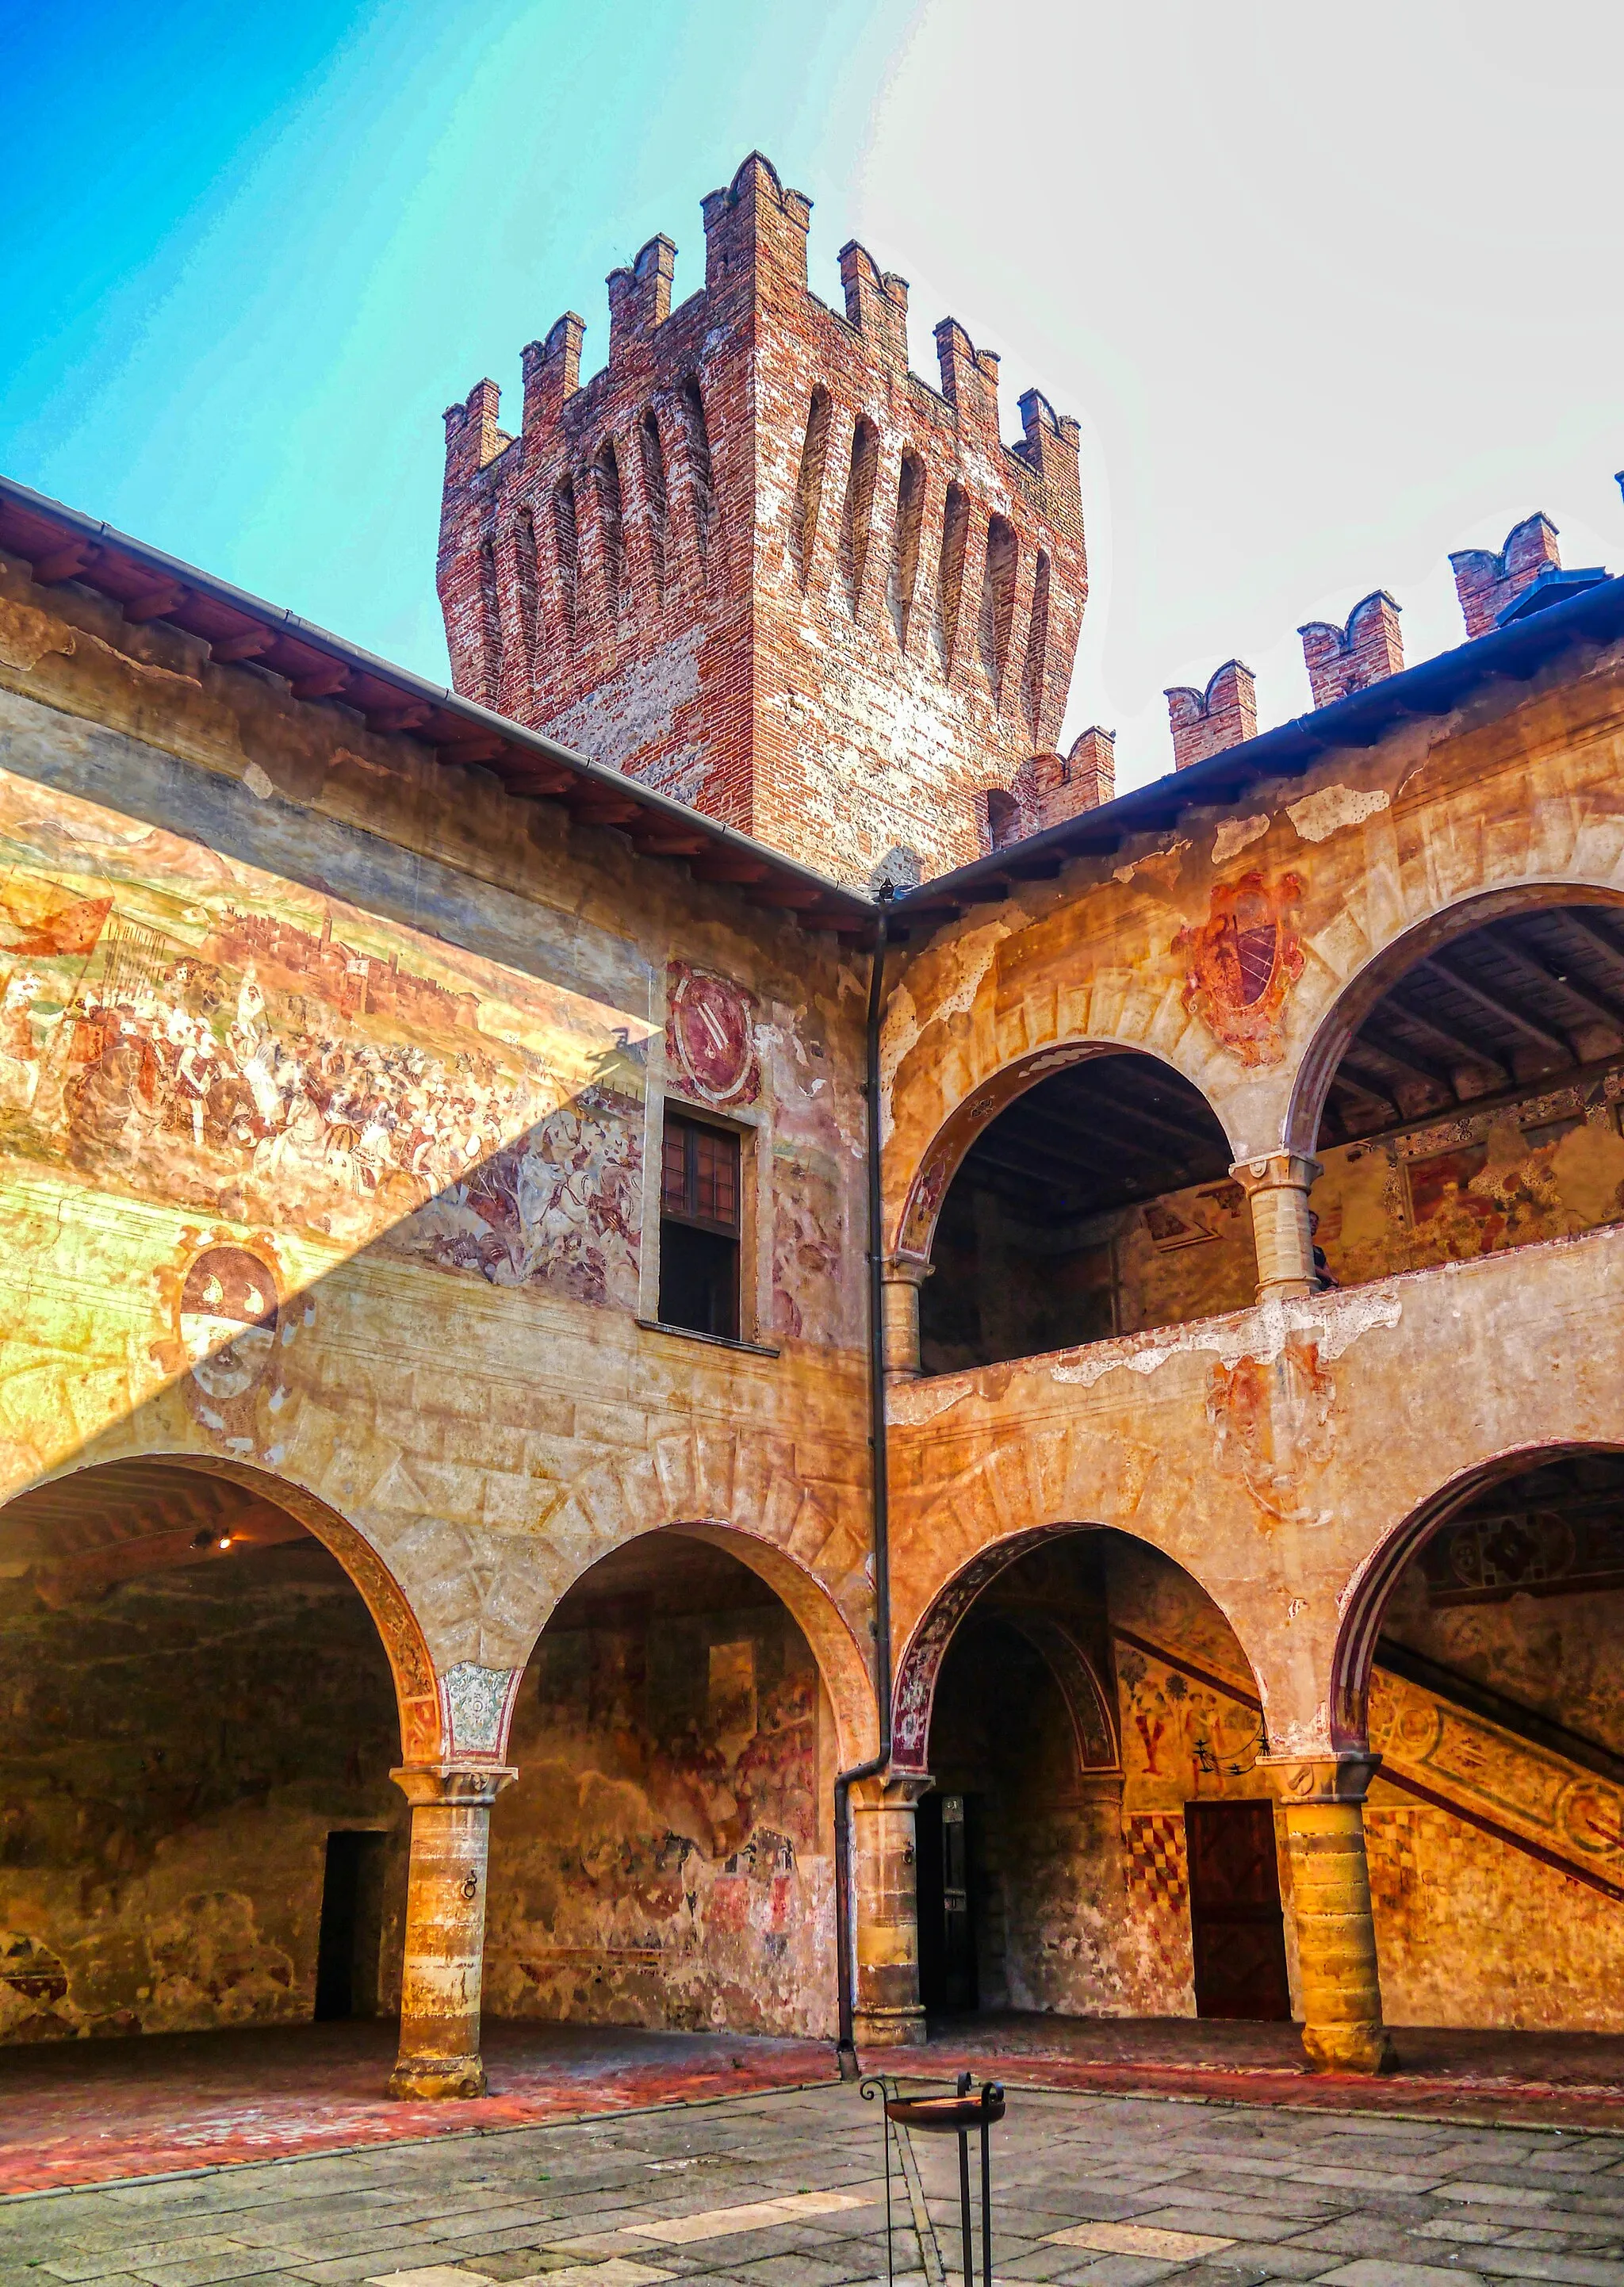 Photo showing: Inner Courtyard of the Malpaga Castle, Cavernago, Province of Brescia, Region of Lombardy, Italy